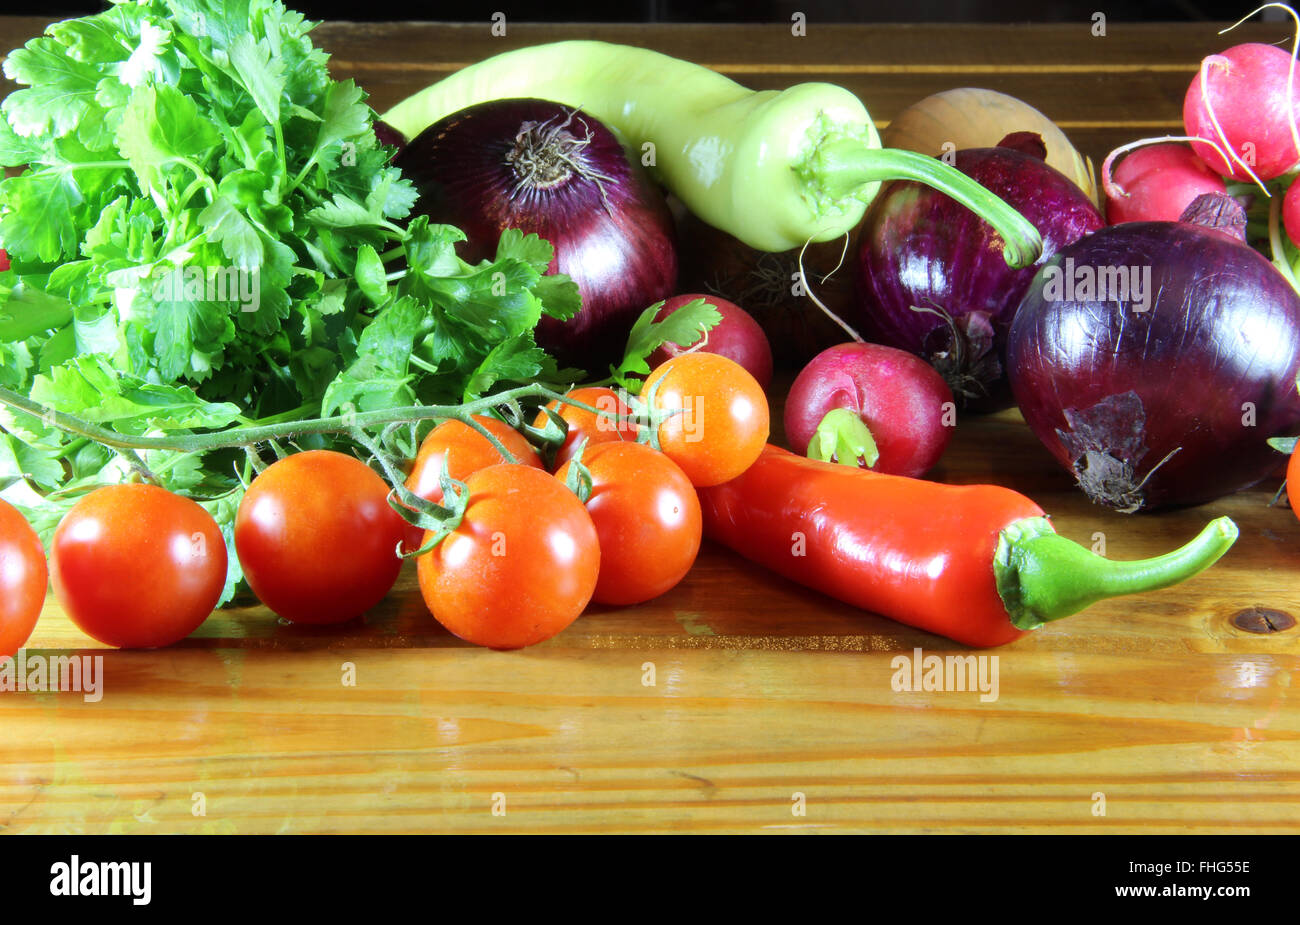 Peppers, tomato, radish, parsley and onions scattered on an old wooden table Stock Photo